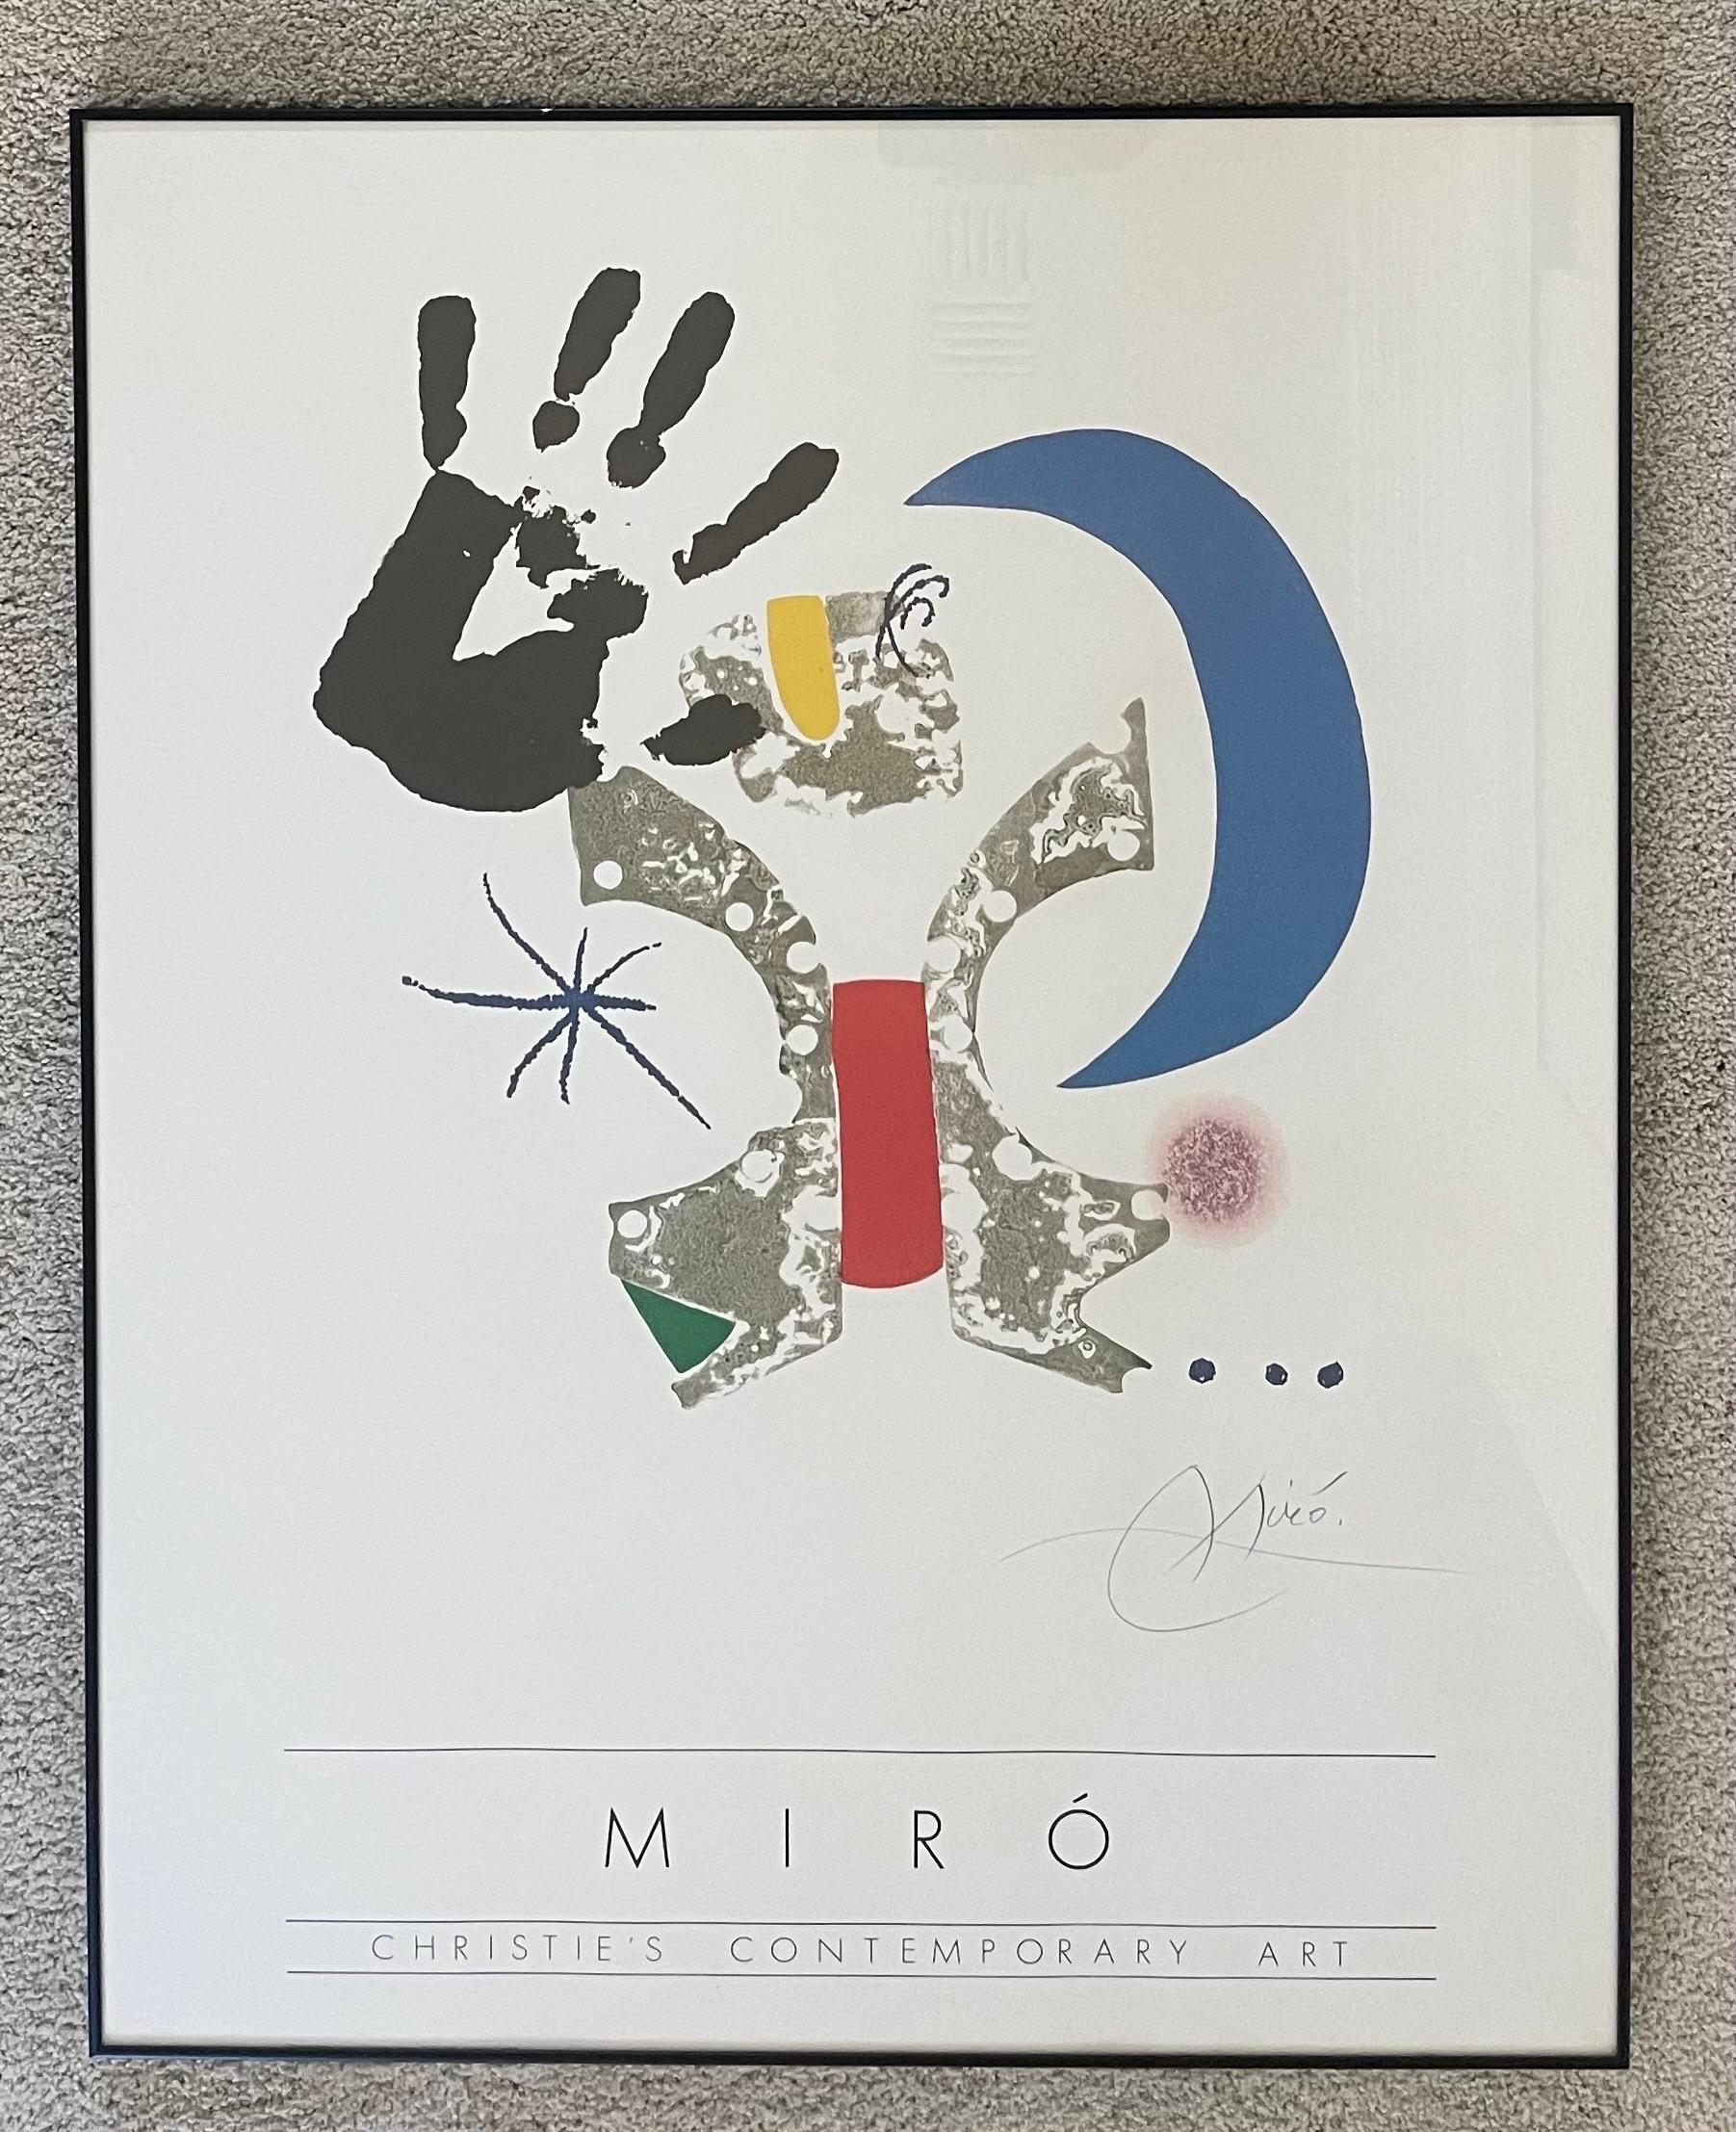 Highly collectible mid-century Joan Miro / Christies Contemporary lithograph art poster, circa 1980s. The poster, which is a reproduction of a 